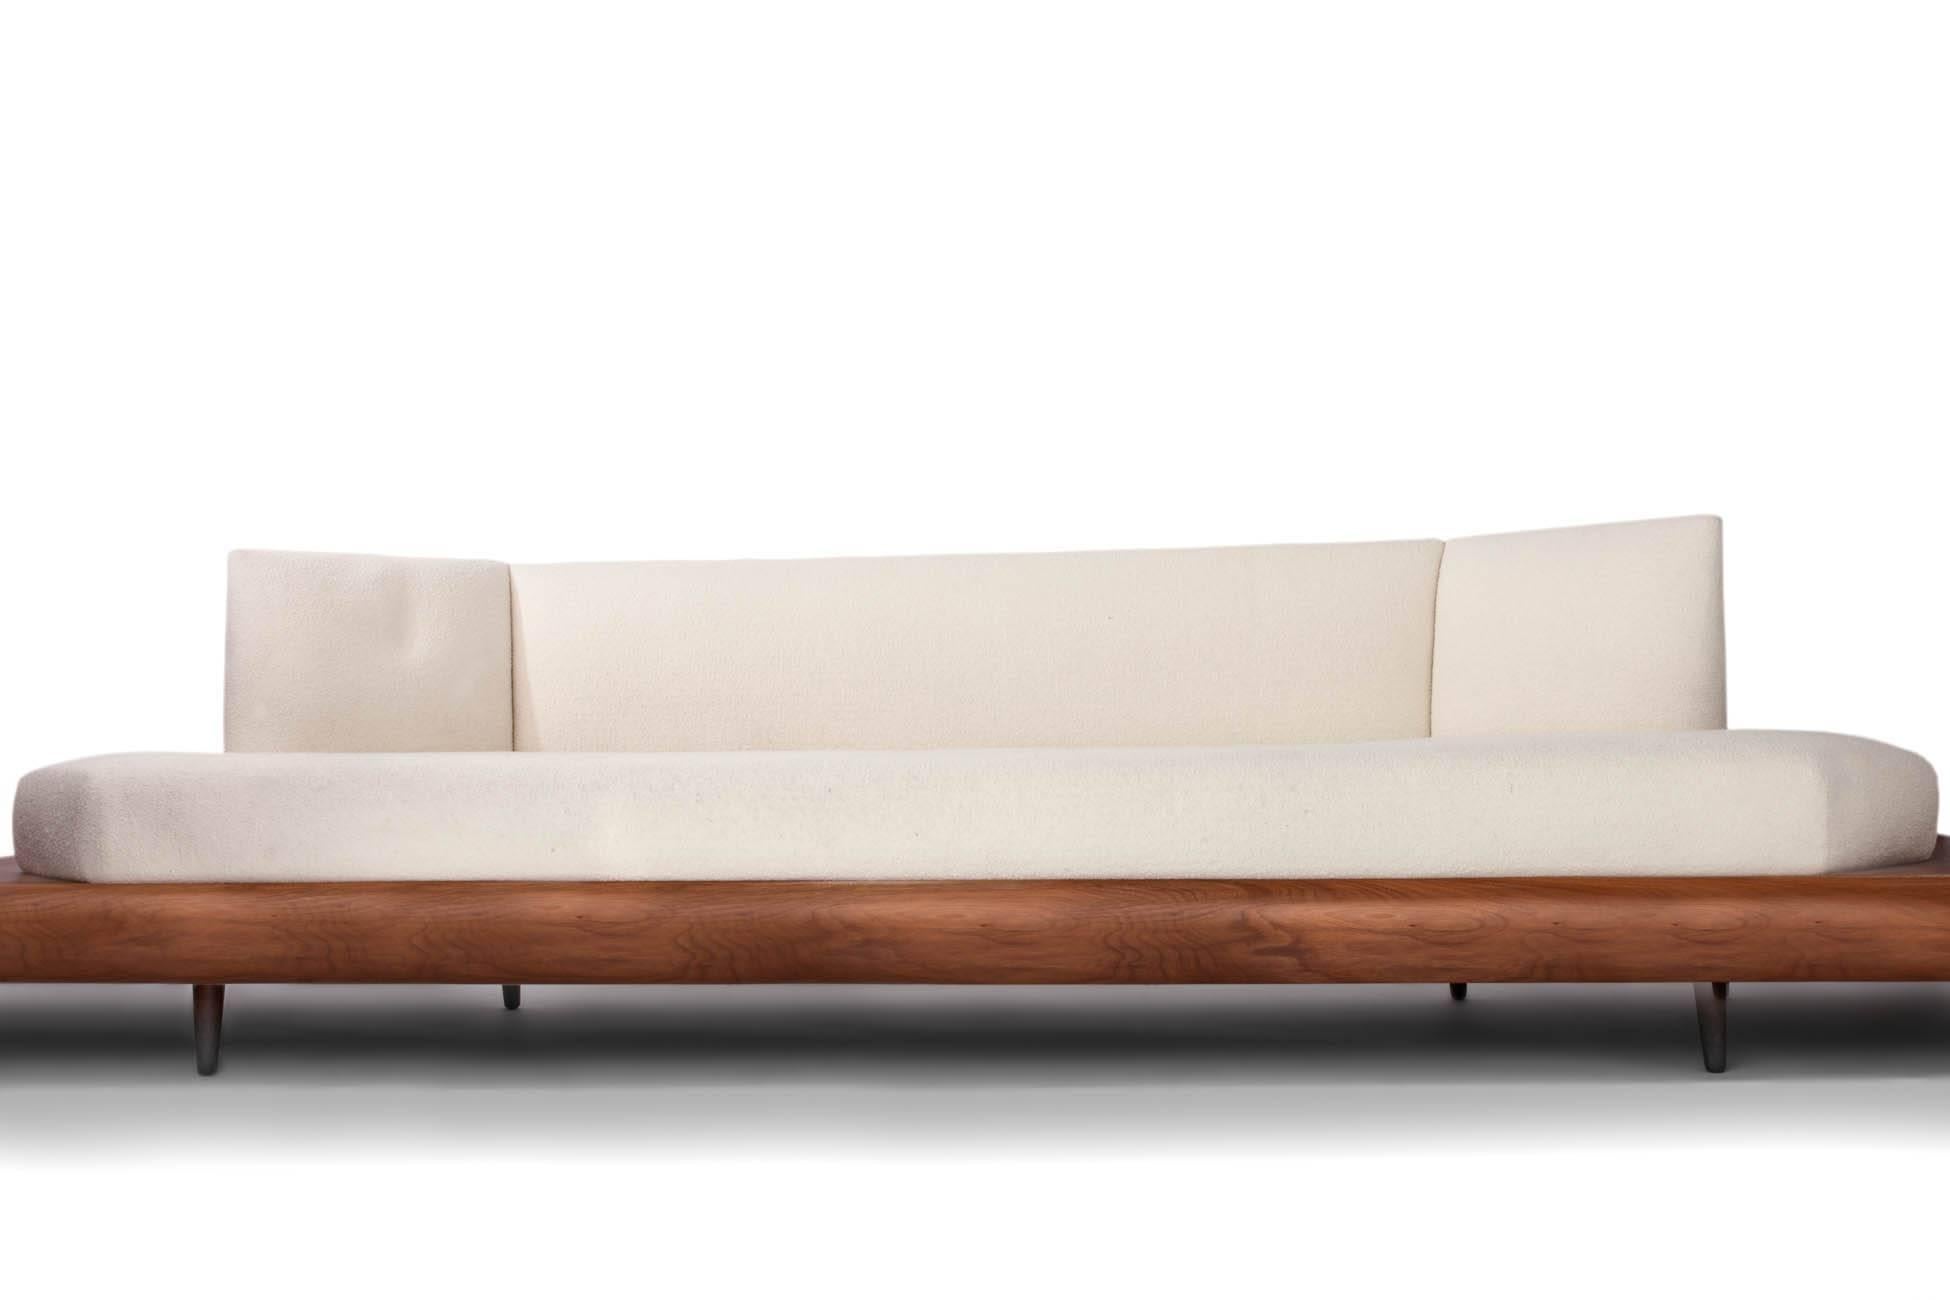 Adrian Pearsall (1925–2011)
An expressive and clean-lined floating geometric sofa by Adrian Pearsall for Craft Associates, with beautifully minimalist built-in end tables, in burled walnut with cream-colored Knoll upholstery.
A certificate of